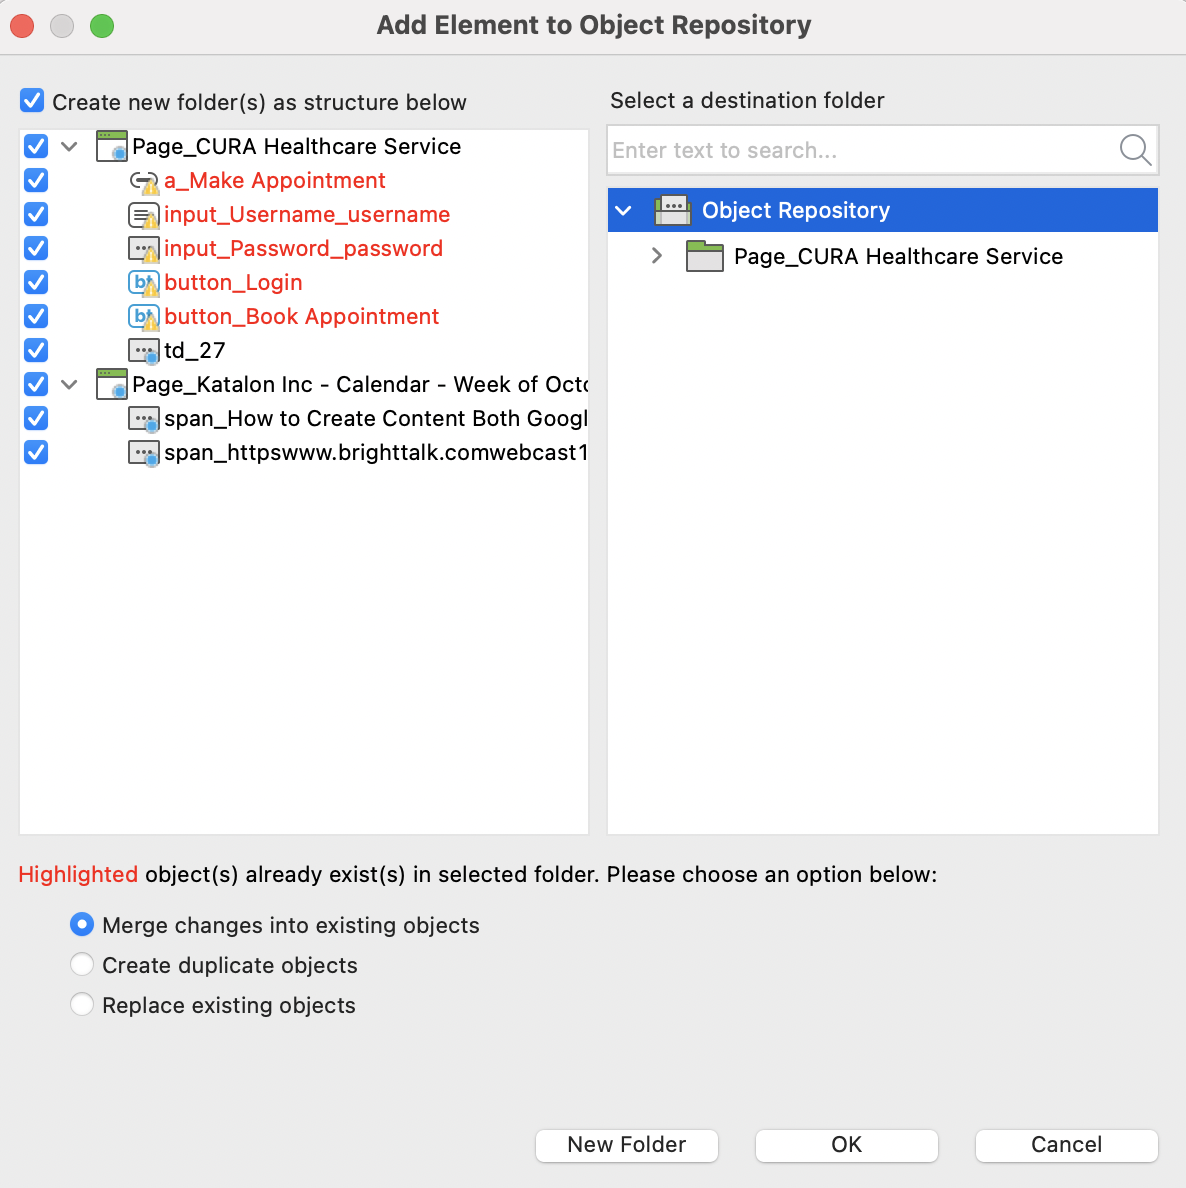 Add element to object repository